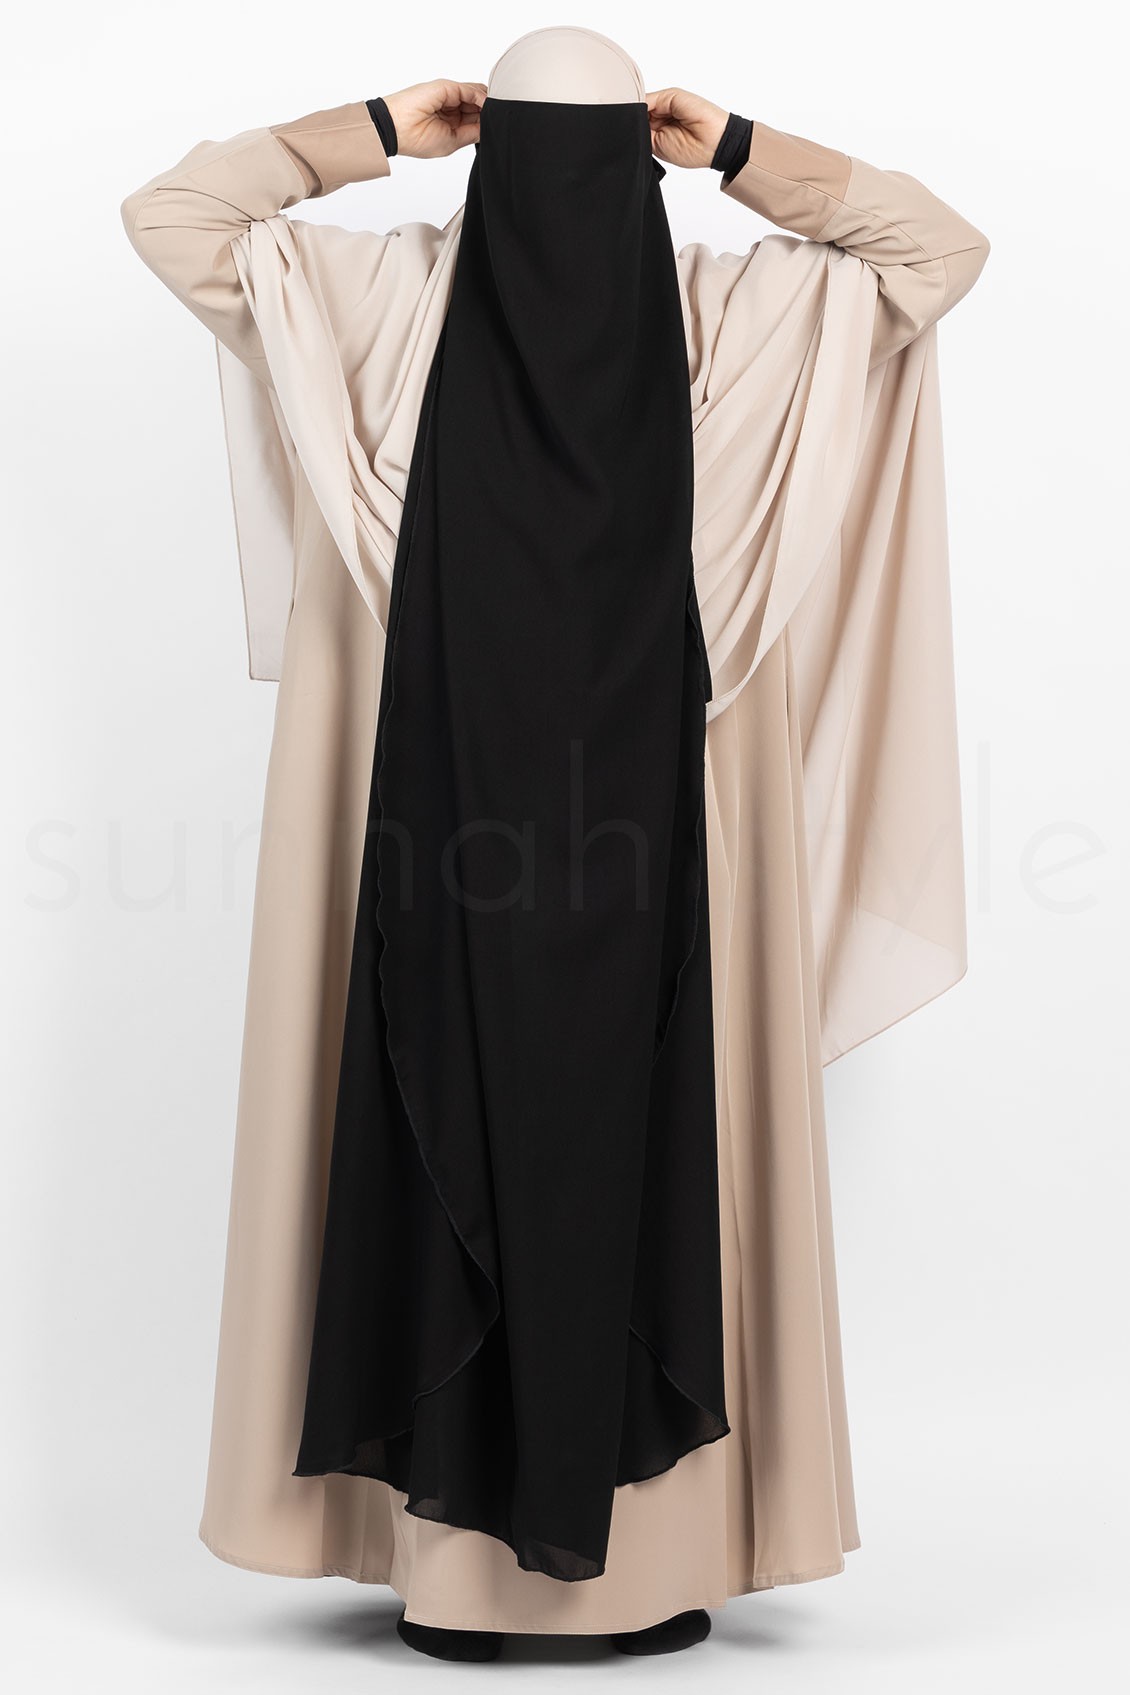 Sunnah Style Extra Long Butterfly Niqab Black